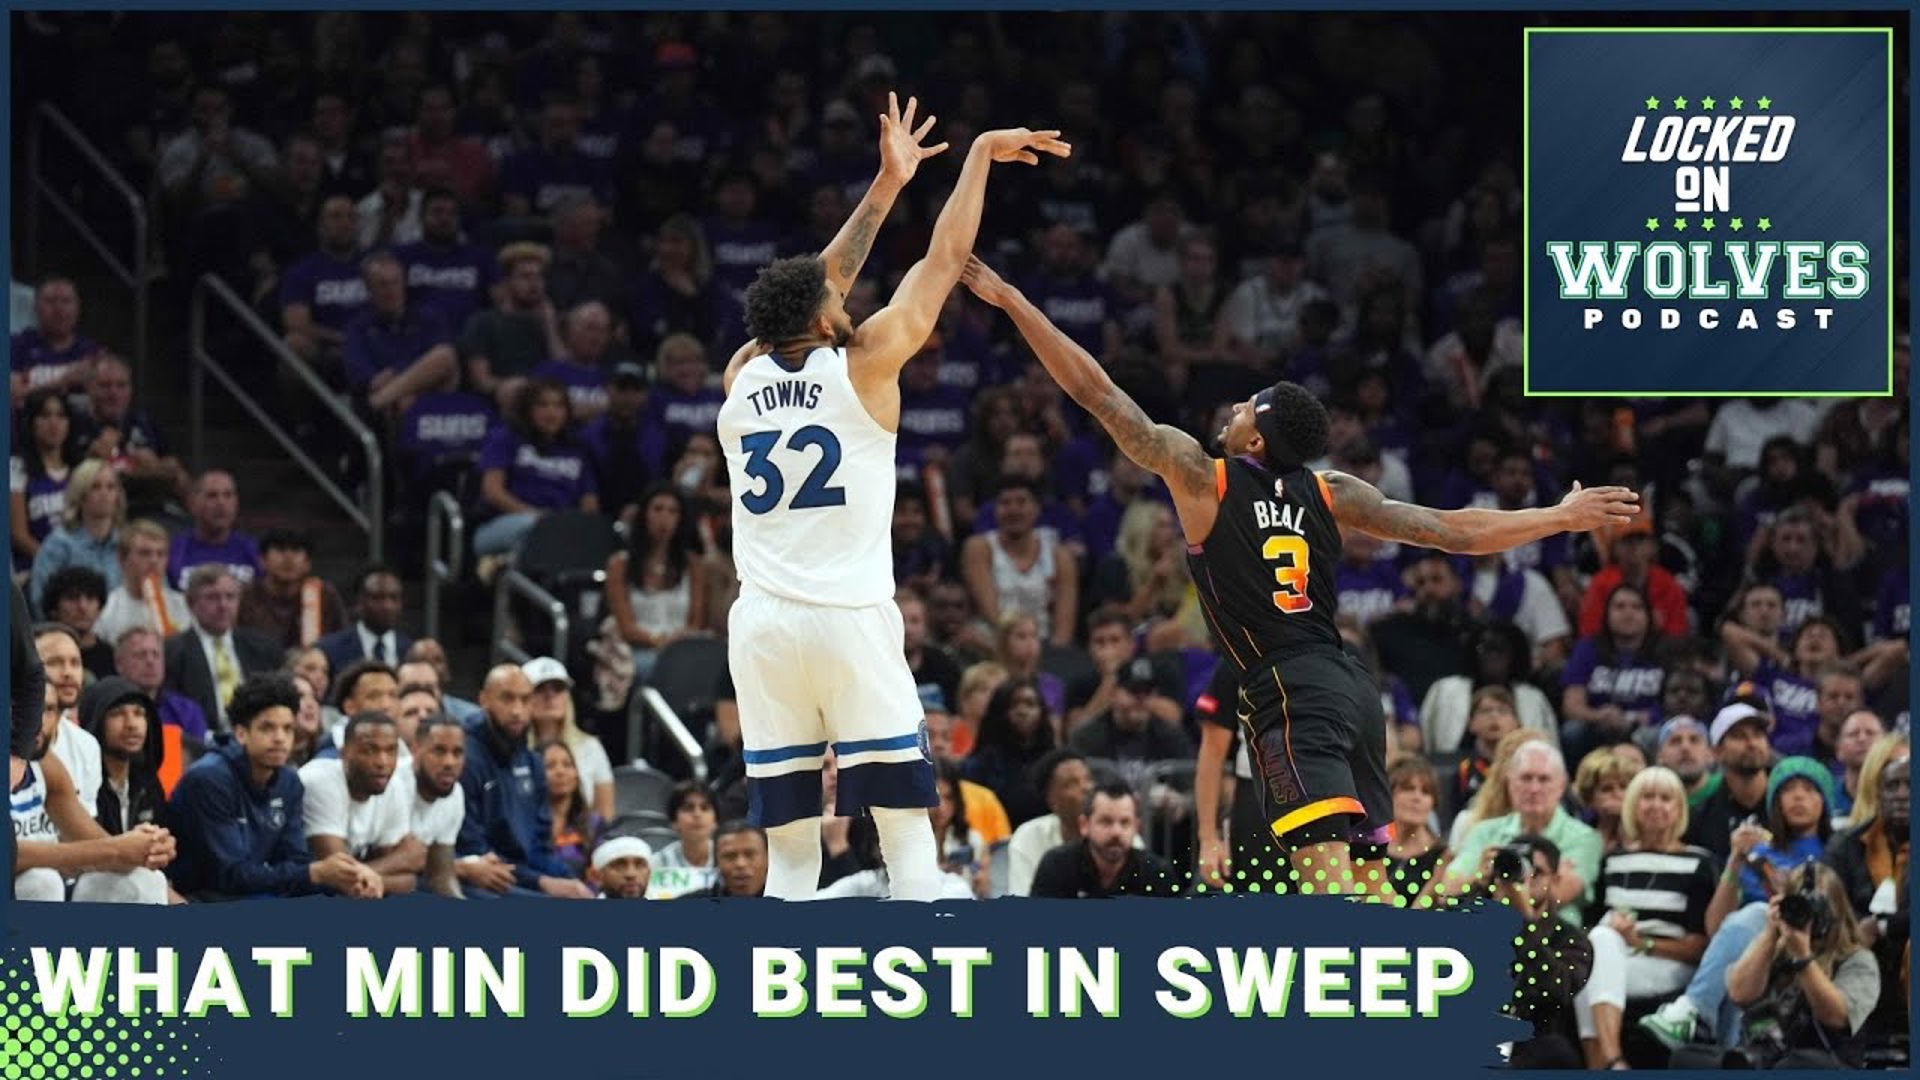 What stands out most from the Minnesota Timberwolves' dominant sweep of the Phoenix Suns